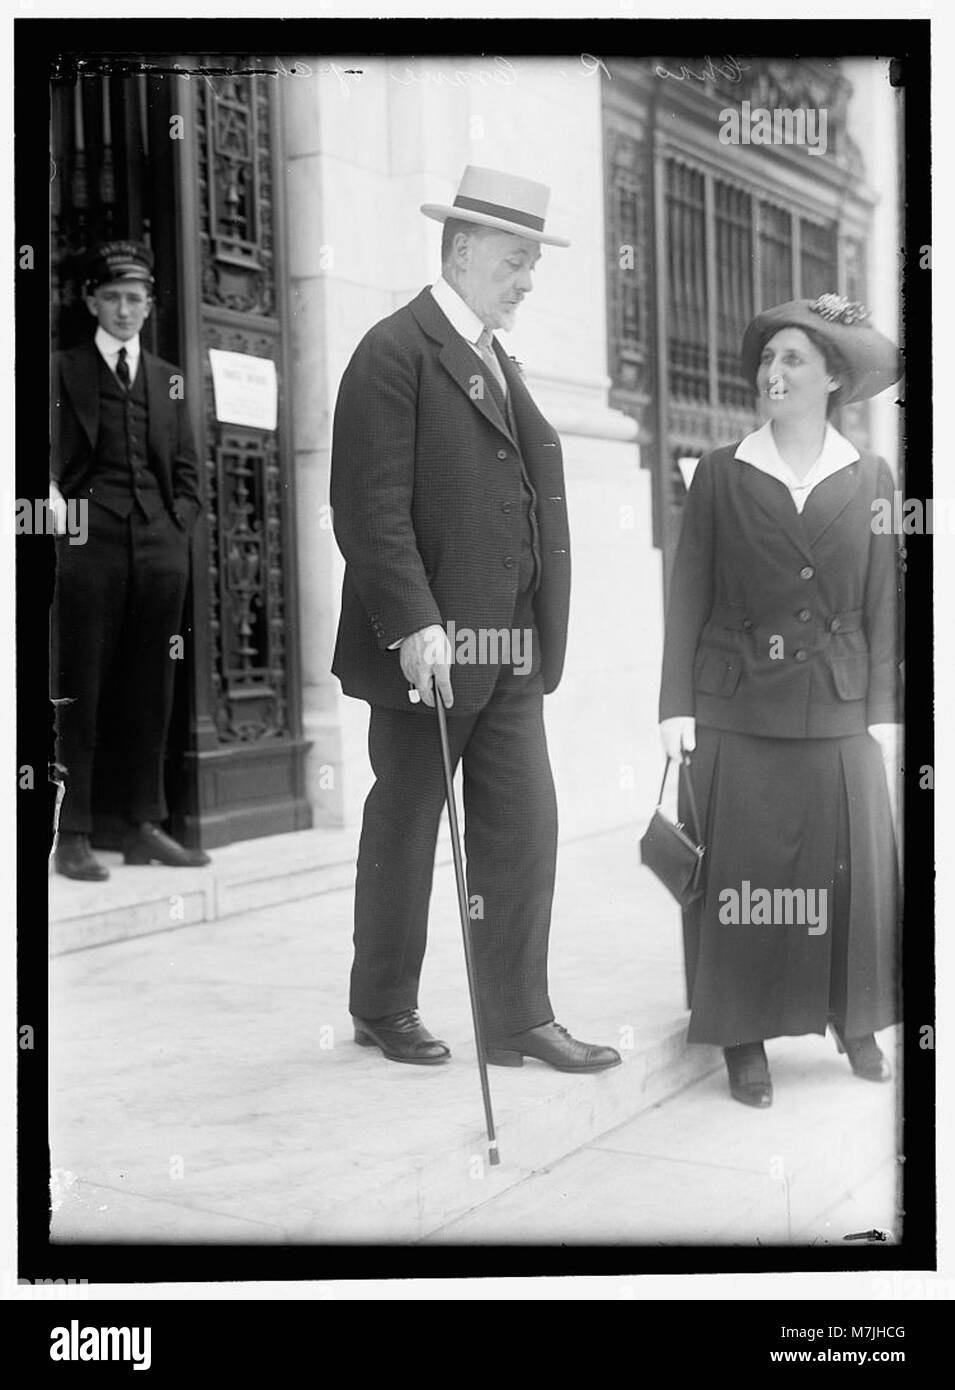 CRANE, CHARLES RICHARD. OF CHICAGO. AMBASSADOR TO CHINA, 1909, RESIGNED BEFORE SERVING. CHAIRMAN OF FINANCE COMMISSION, 1912 LCCN2016866492 Stock Photo